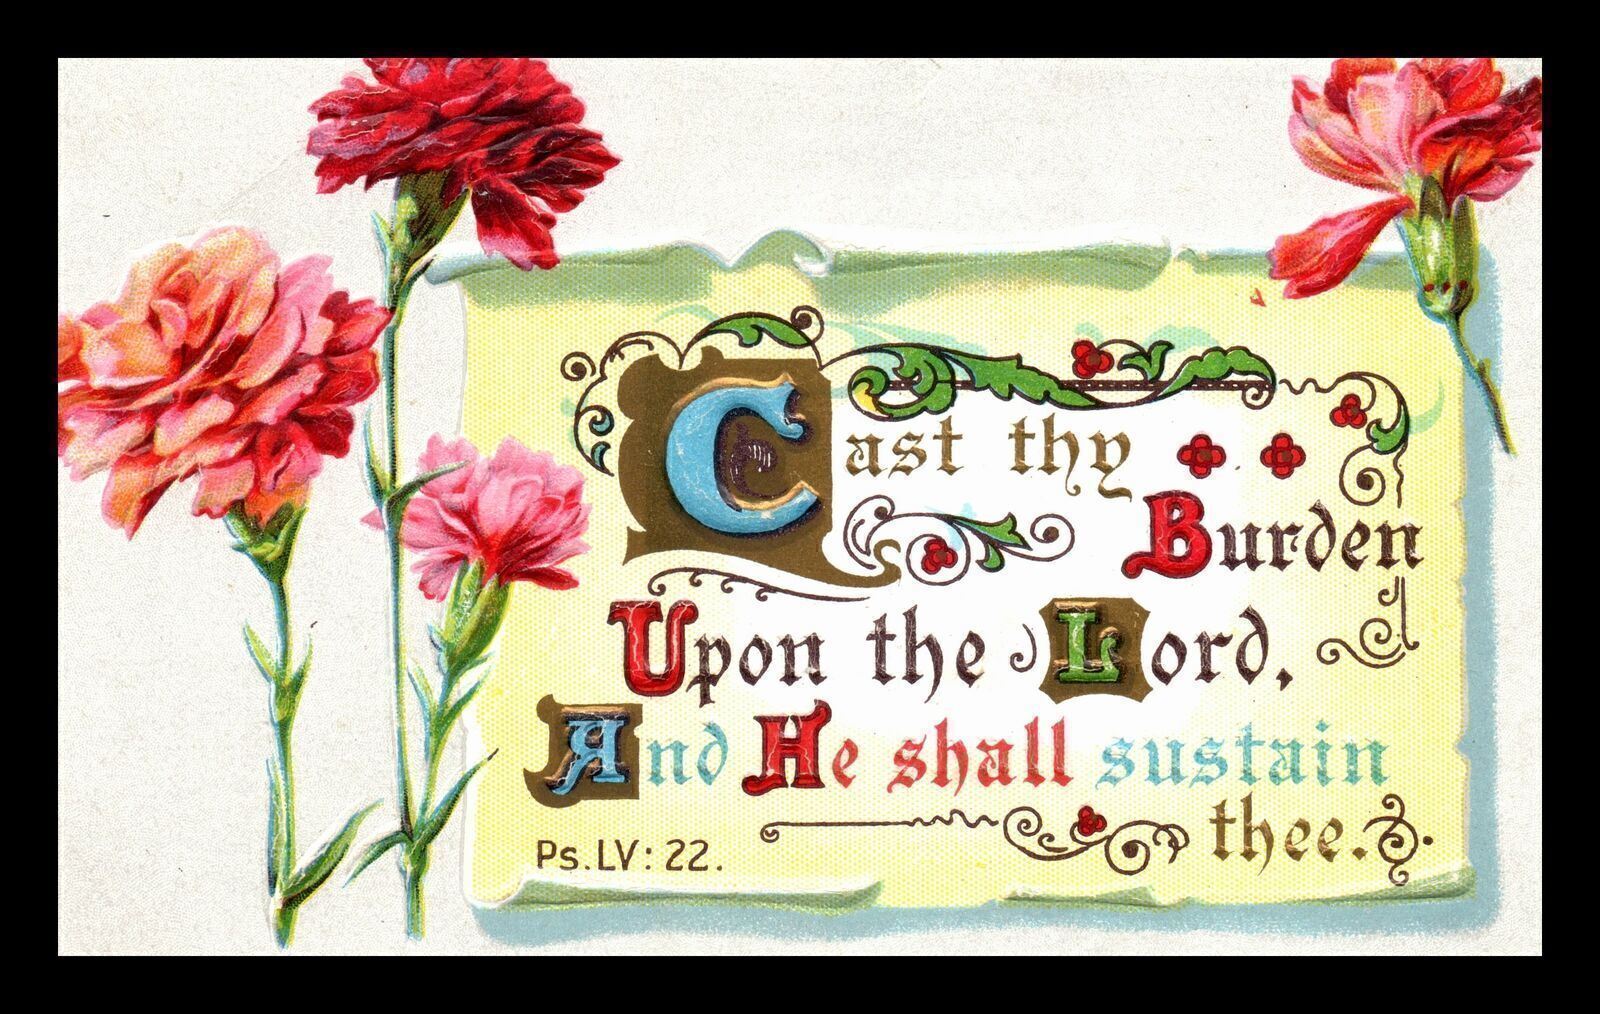 c1910 Cast Thy Burden Upon the Lord and He Shall Sustain Thee Postcard 5-57